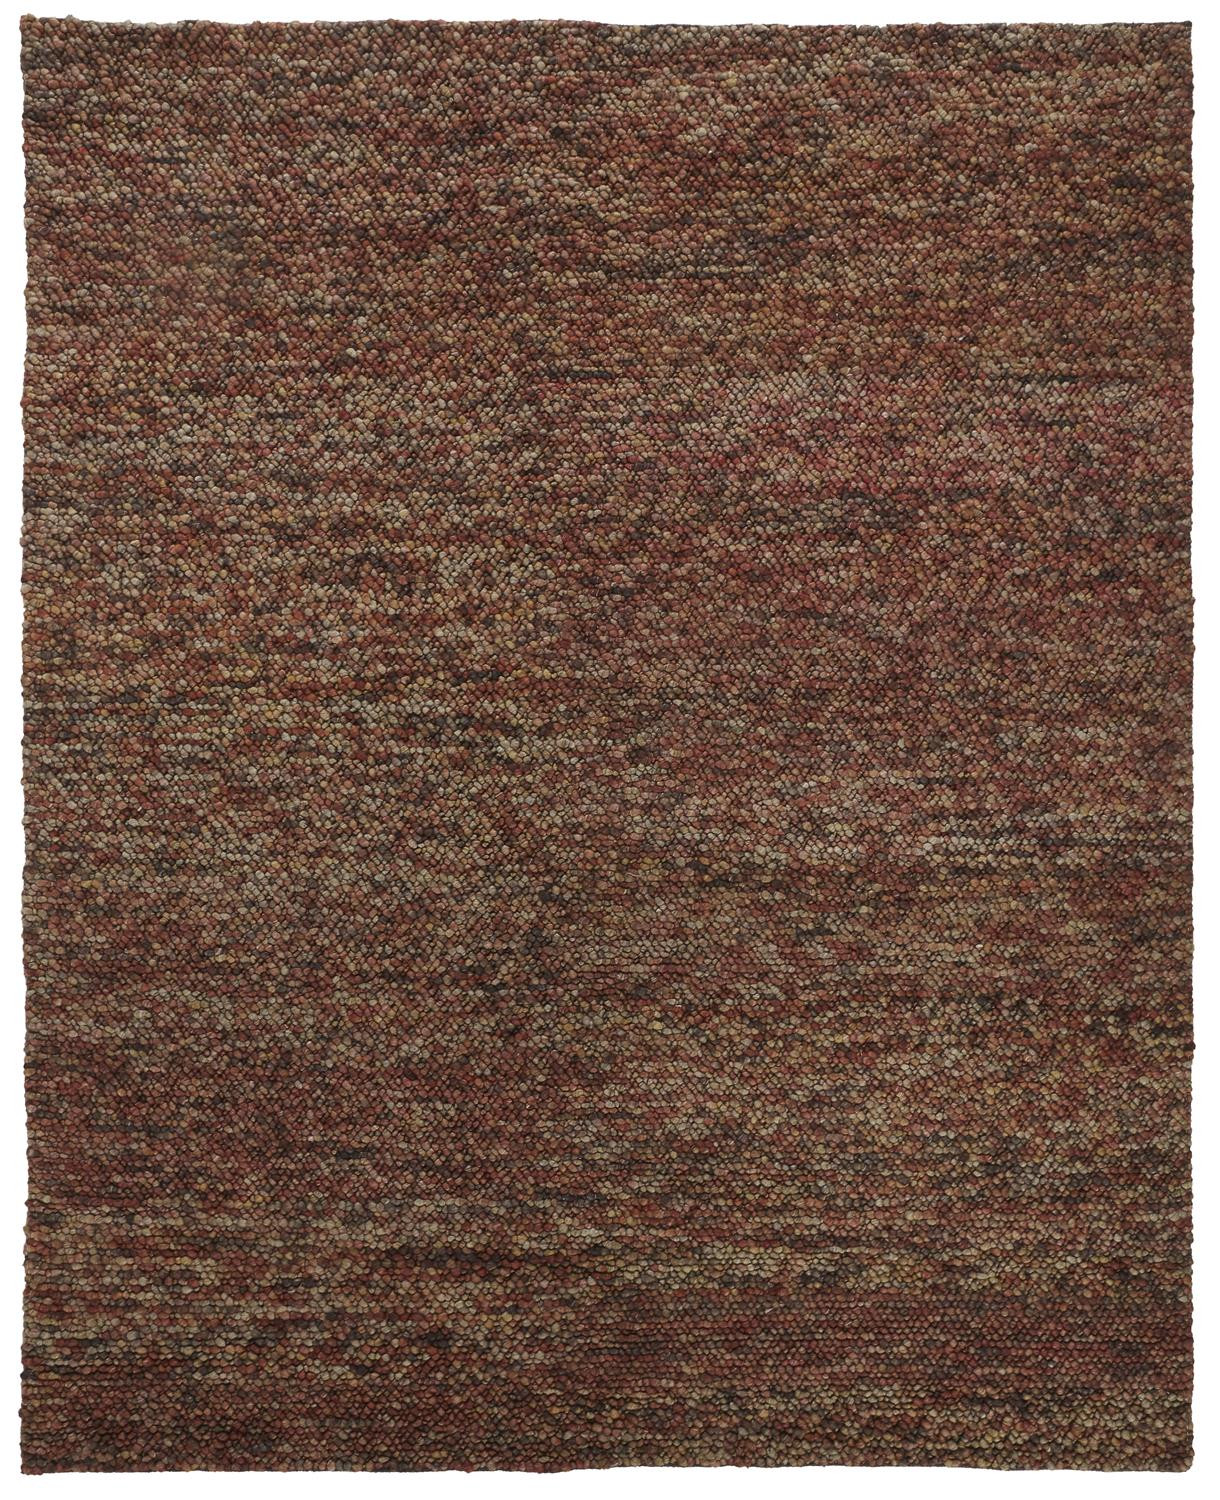 8' X 11' Brown Orange And Red Wool Hand Woven Distressed Stain Resistant Area Rug-515290-1